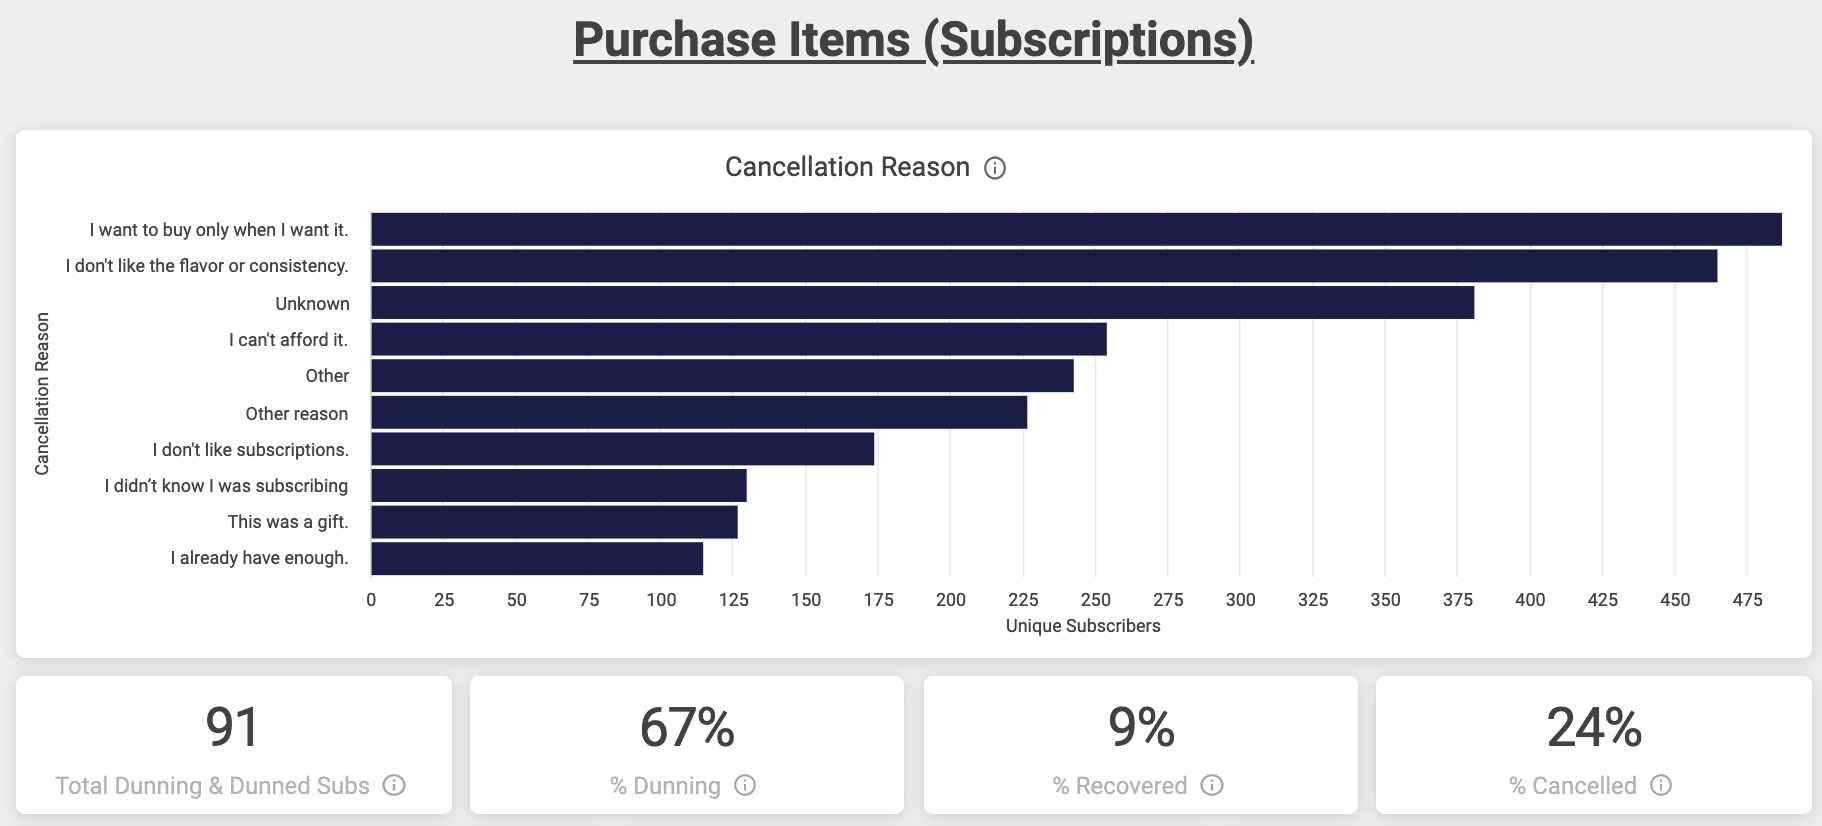 The Purchase Items dashboard provides insights into customer cancelations